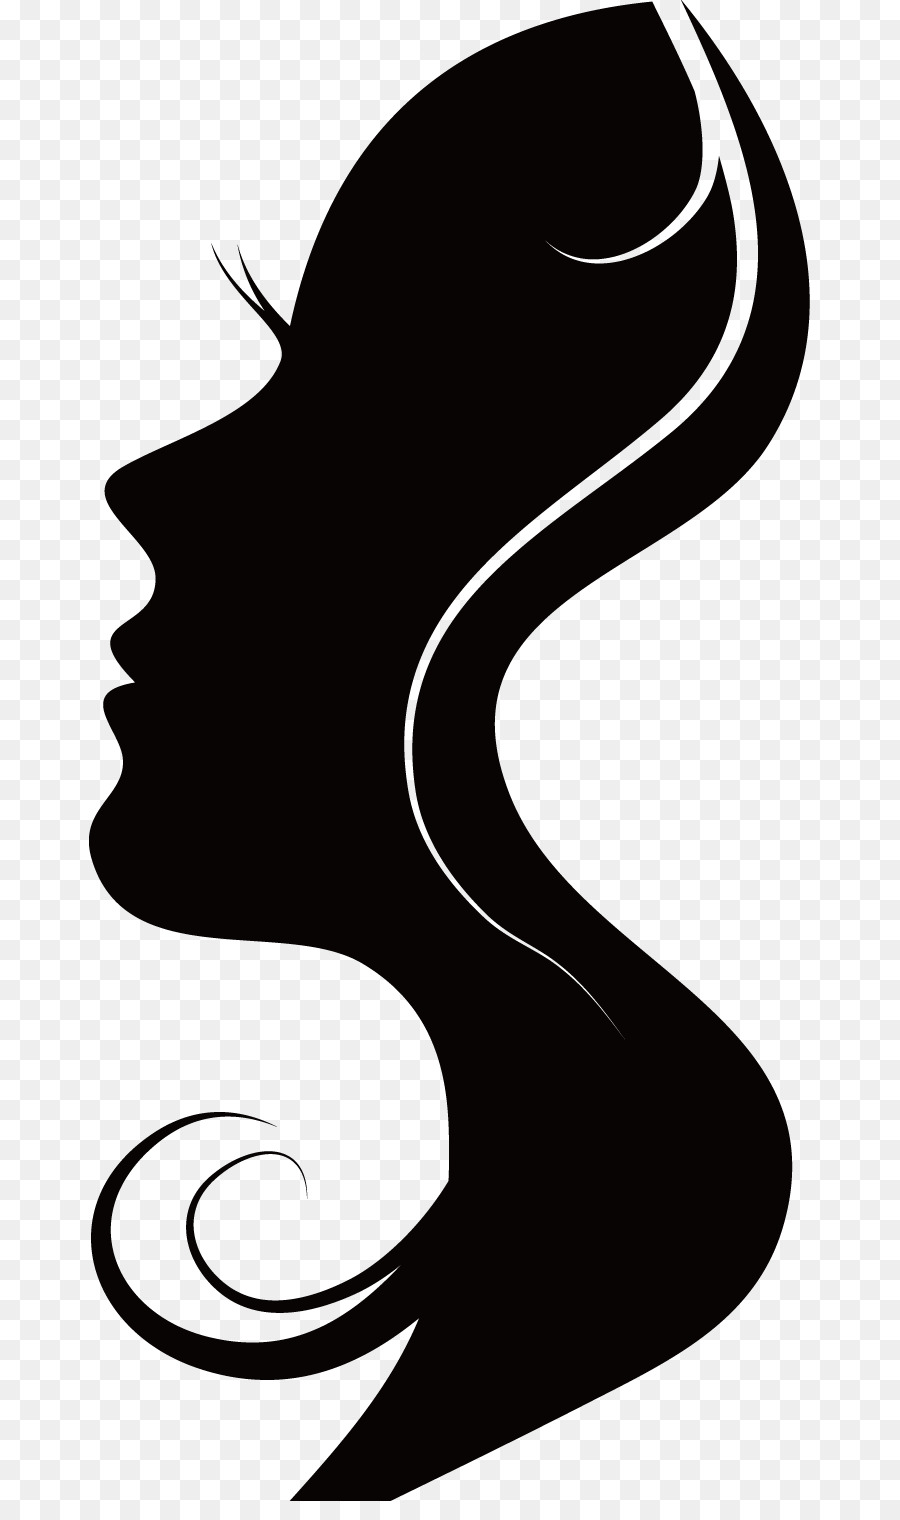 Free Lady Silhouette Png, Download Free Clip Art, Free Clip Art on